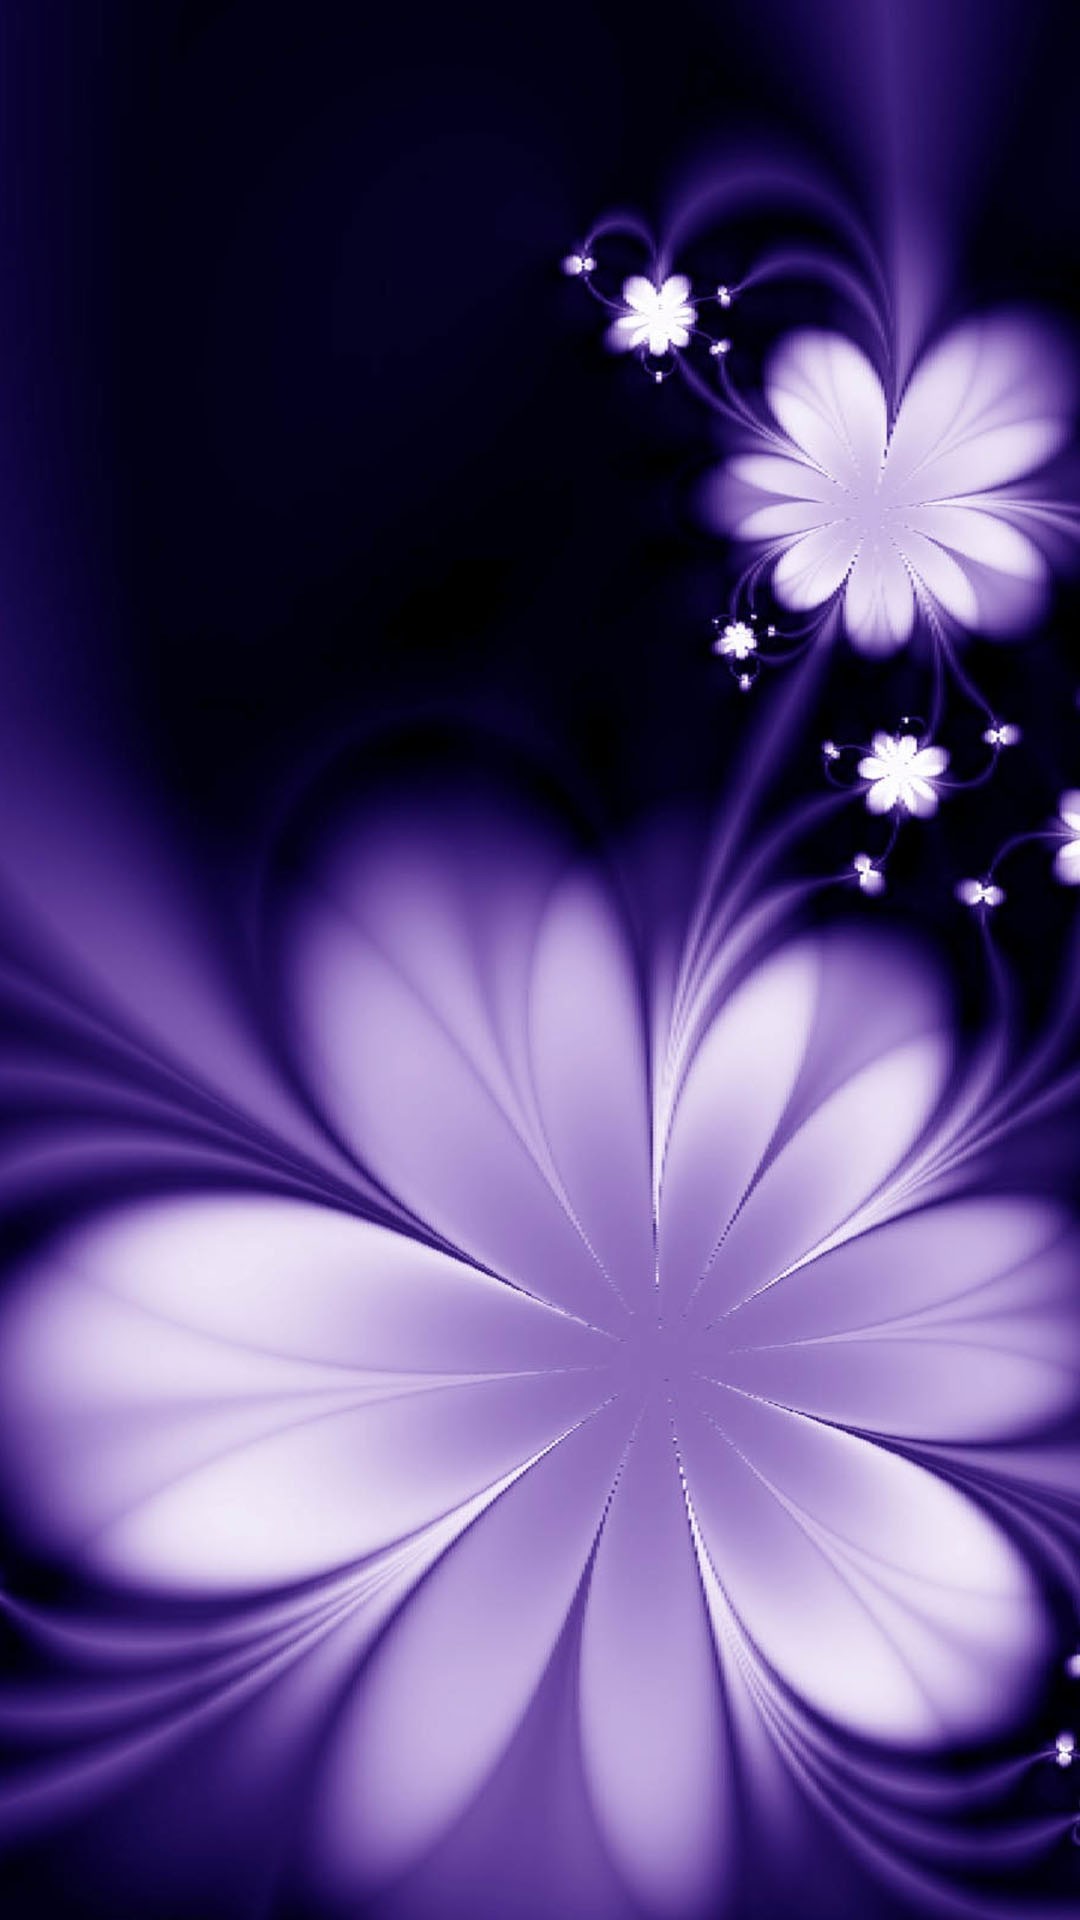 1080x1920 Artistic Beautiful Flower Patterns HD 1080p Mobile Background -  http://helpyourselfimages.com. Wallpaper SamsungPhone ...